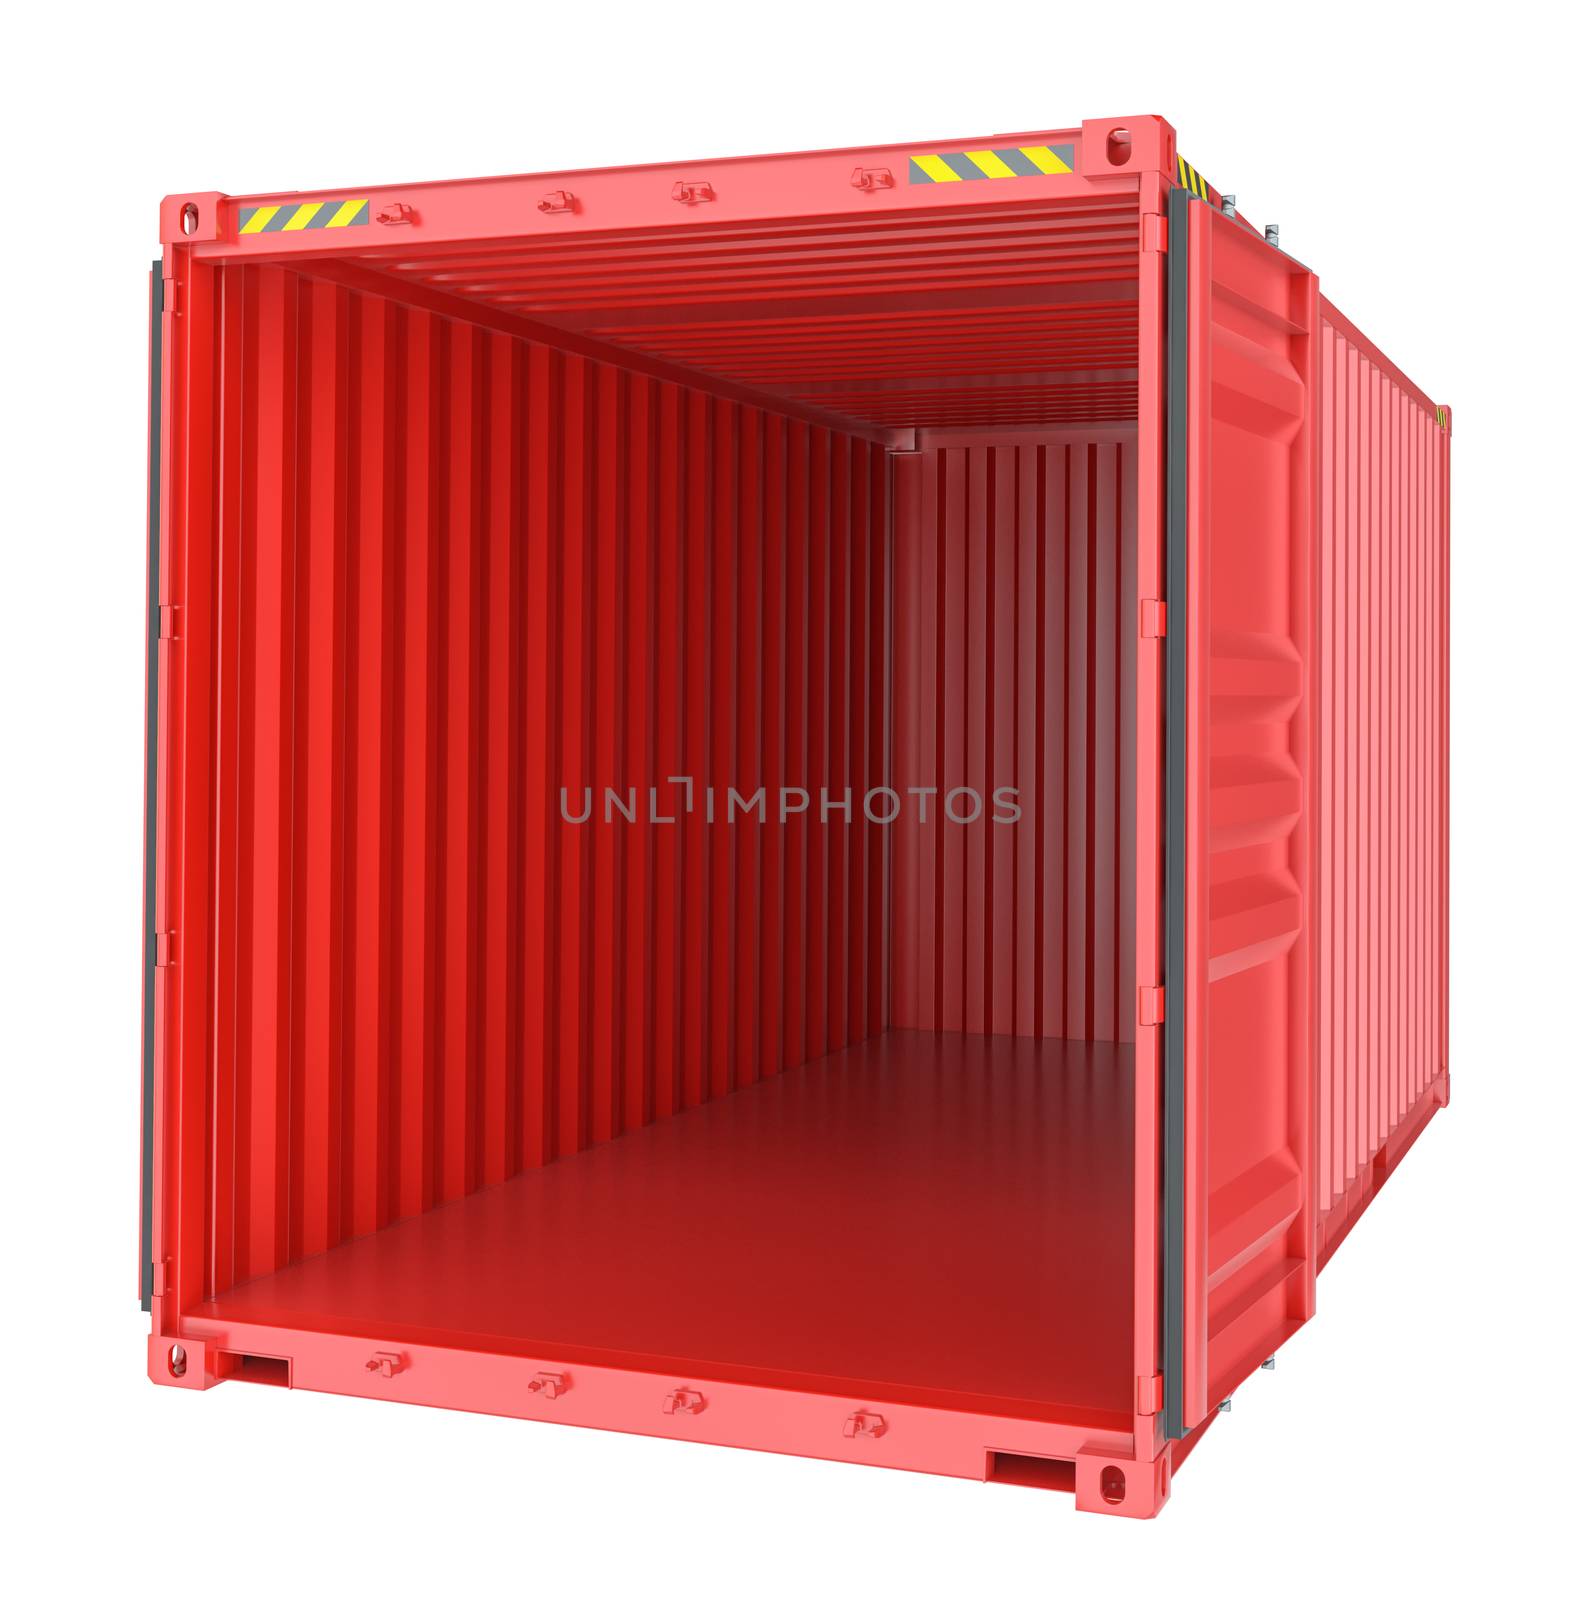 Freight shipping, open empty cargo container by cherezoff